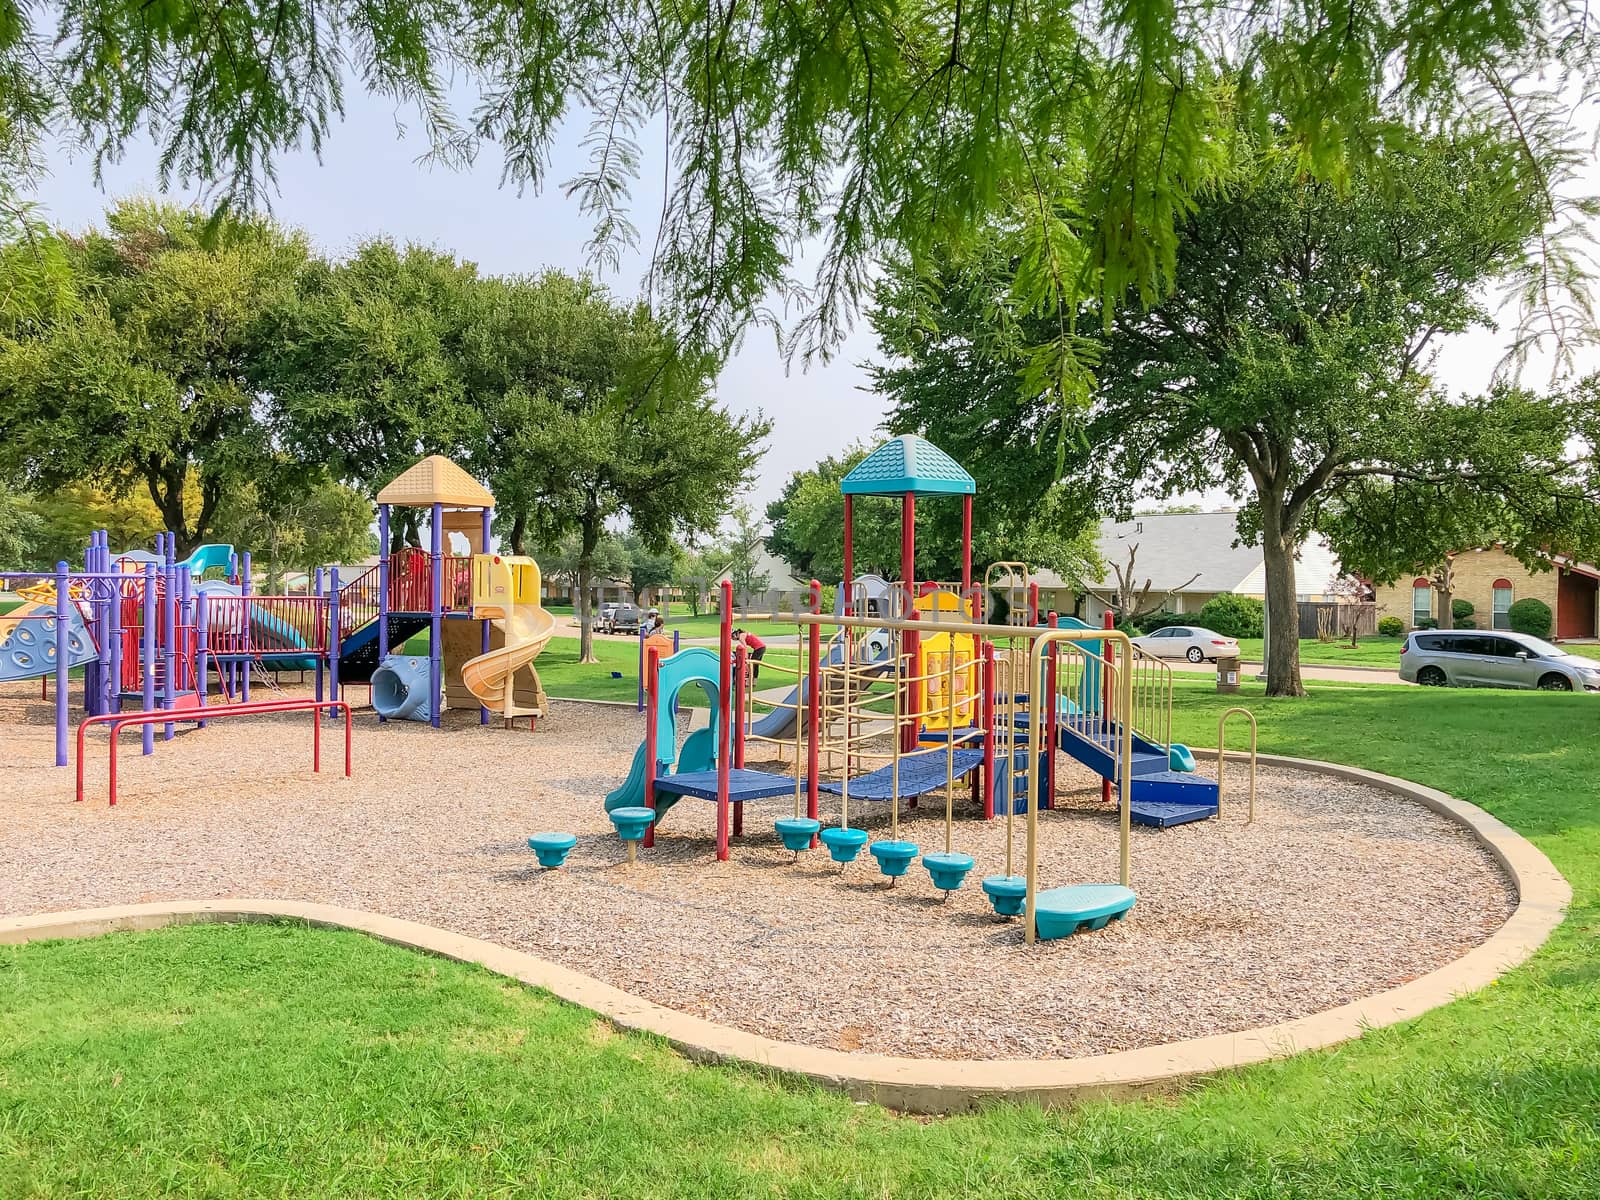 Colorful playground near residential neighborhood in Richardson, Texas, America. Community facility surrounded by large oak trees and green grass lawn